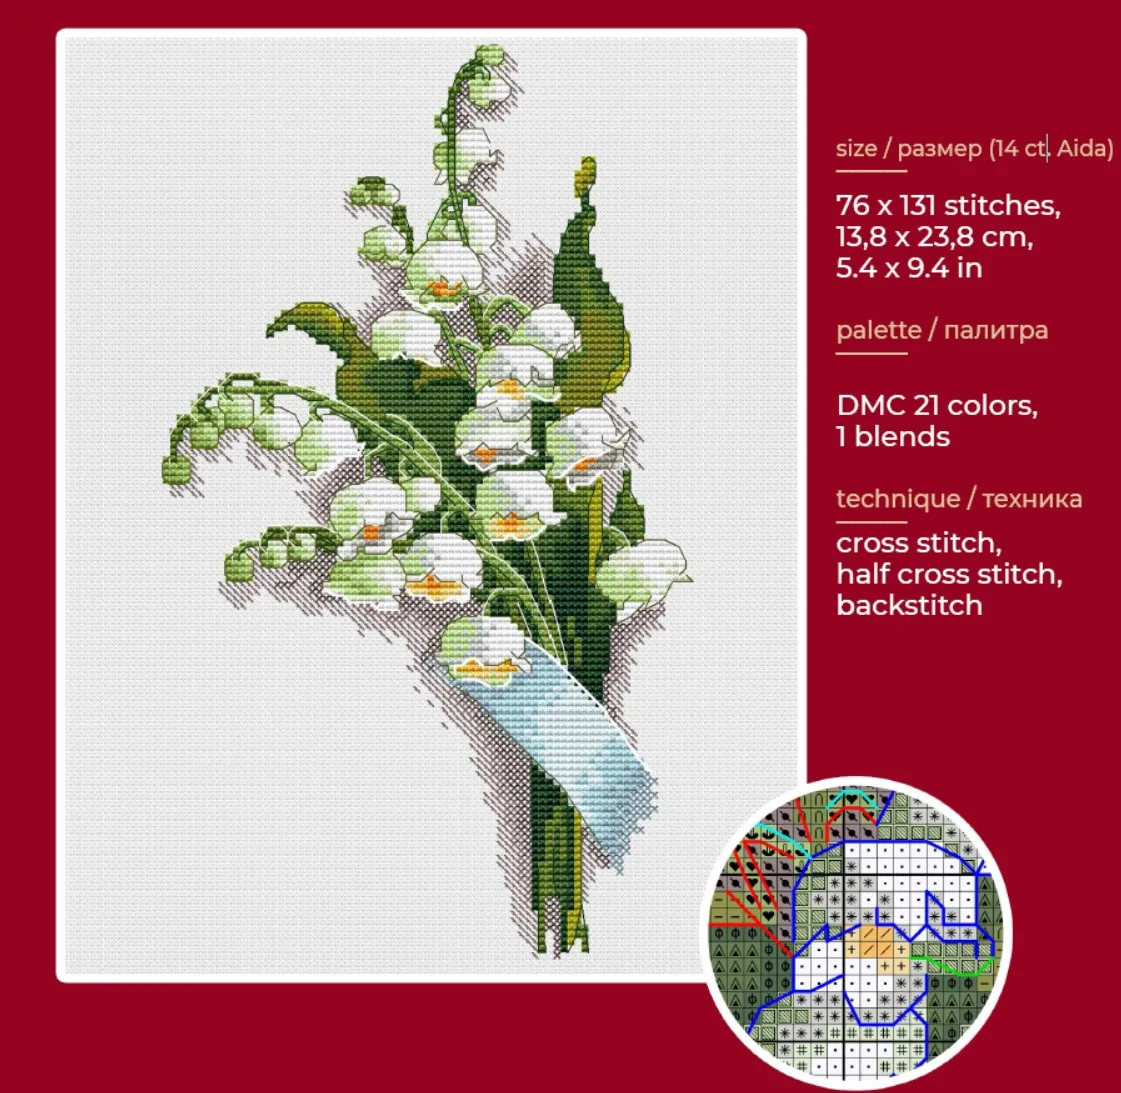 

-lily Of The Valley Bouquet 24-34 Cross Stitch Kit Aida Count Unprint Canvas Stitches Embroidery DIY Handmade Needlework